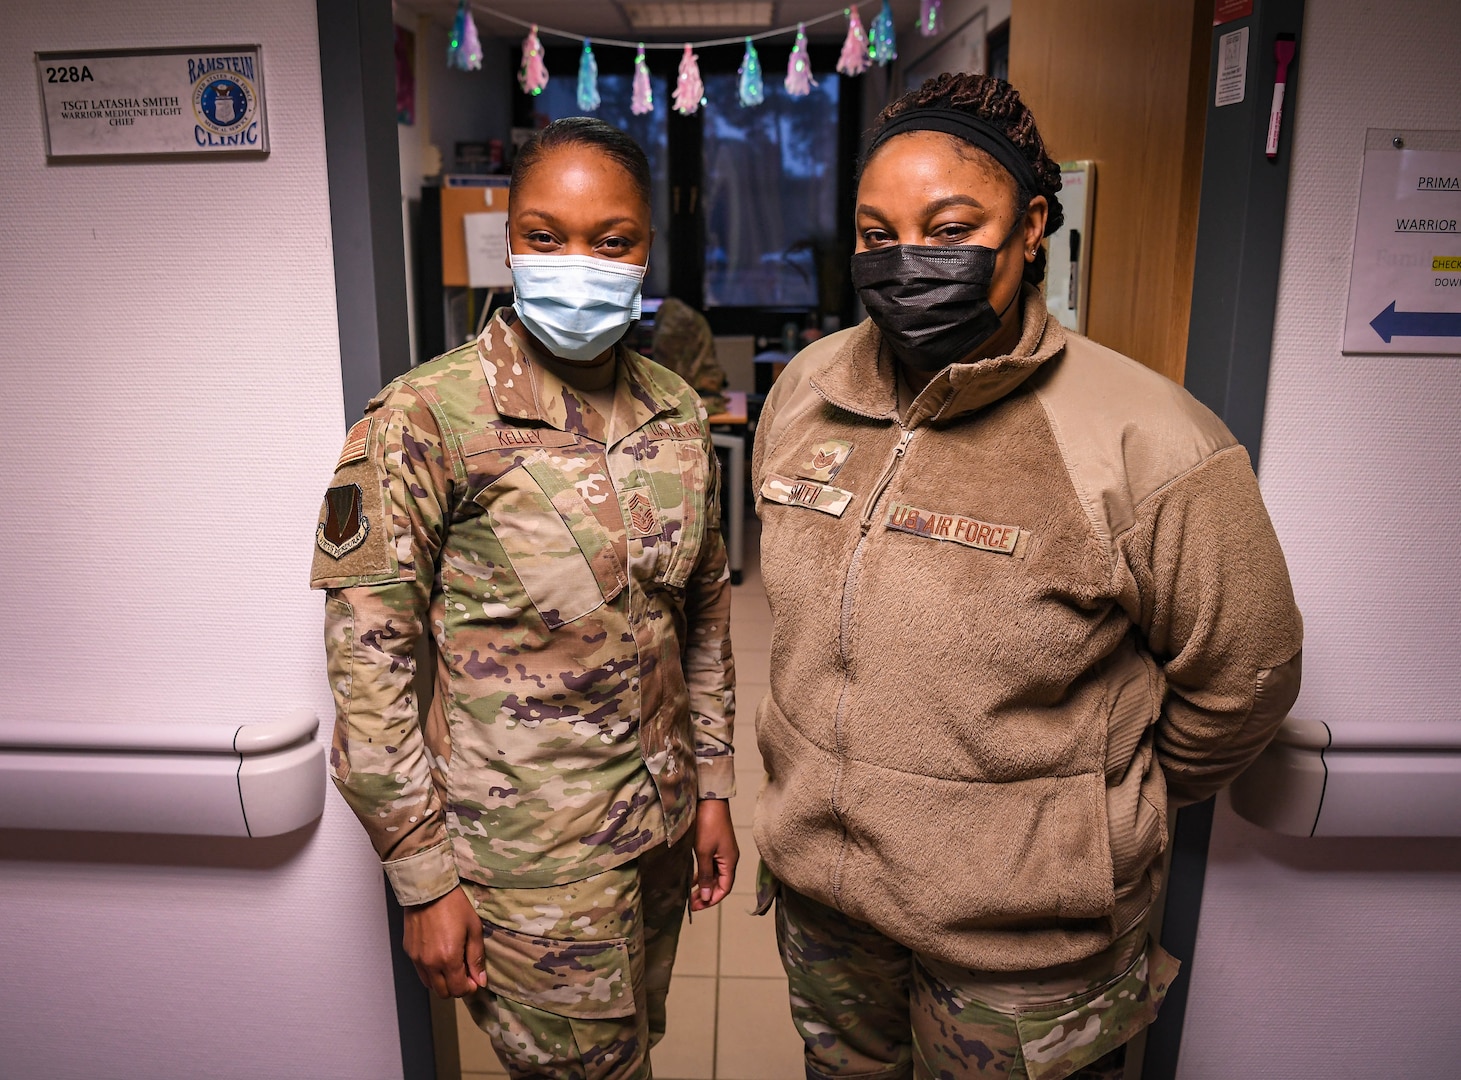 U.S. Air Force Tech. Sgt. Latasha Smith, 86th Operational Medical Readiness Squadron warrior medicine clinic flight chief, right, poses for a photo with Chief Master Sgt. Charmaine Kelley, 86th Airlift Wing command chief, left, at Ramstein Air Base, Germany, Jan. 27, 2022. Smith is responsible for streamlining the COVID-19 vaccine line, resulting in the inoculation of approximately 2,500 active duty service members, dependents and civilians, within the past 40 days. (U.S. Air Force photo by Airman 1st Class Jared Lovett)